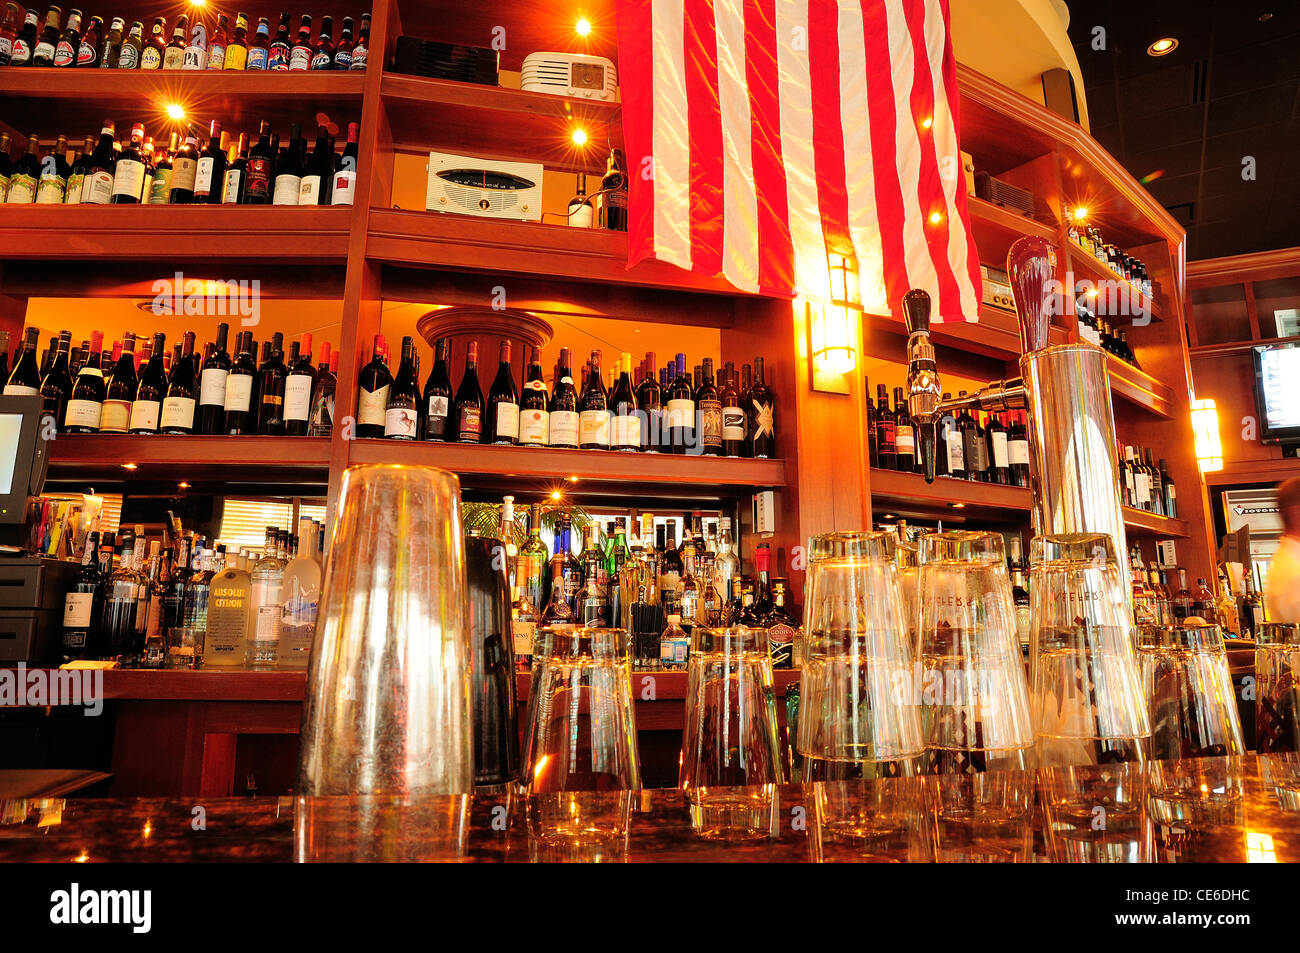 Interior view of the Bar at Keefers, an upscale restaurant in Chicago, Illinois, USA. Stock Photo